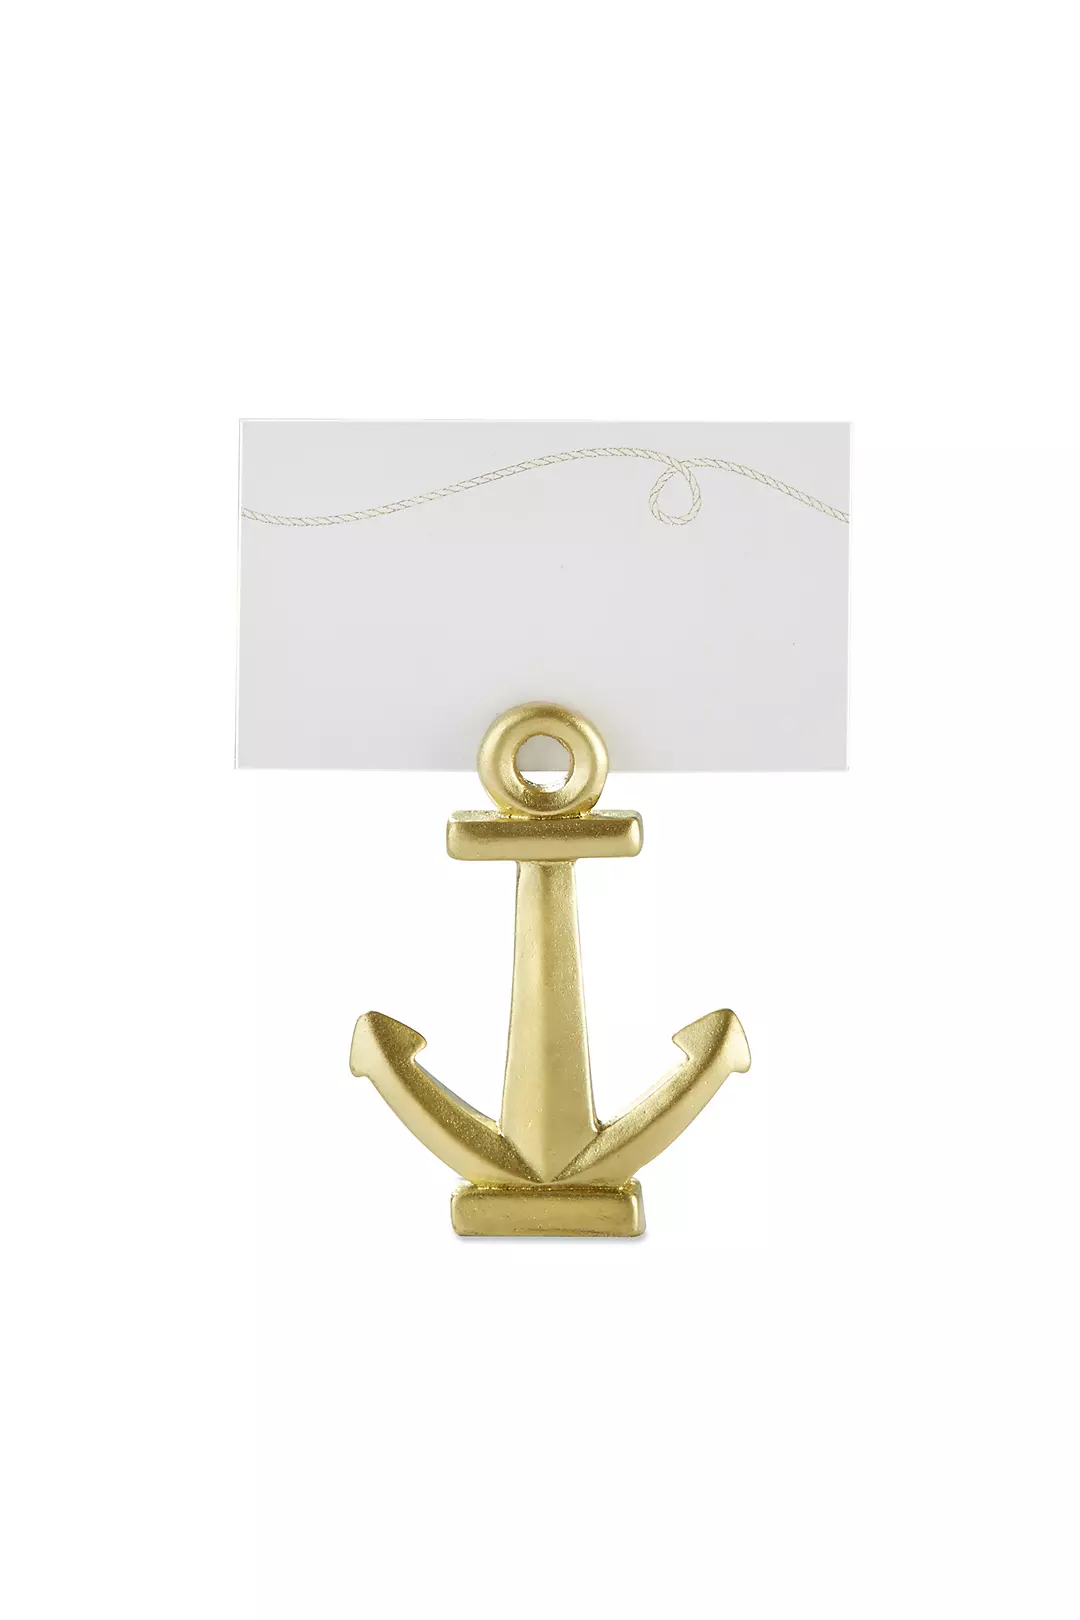 Gold Nautical Anchor Place Card Holder Set of 12 Image